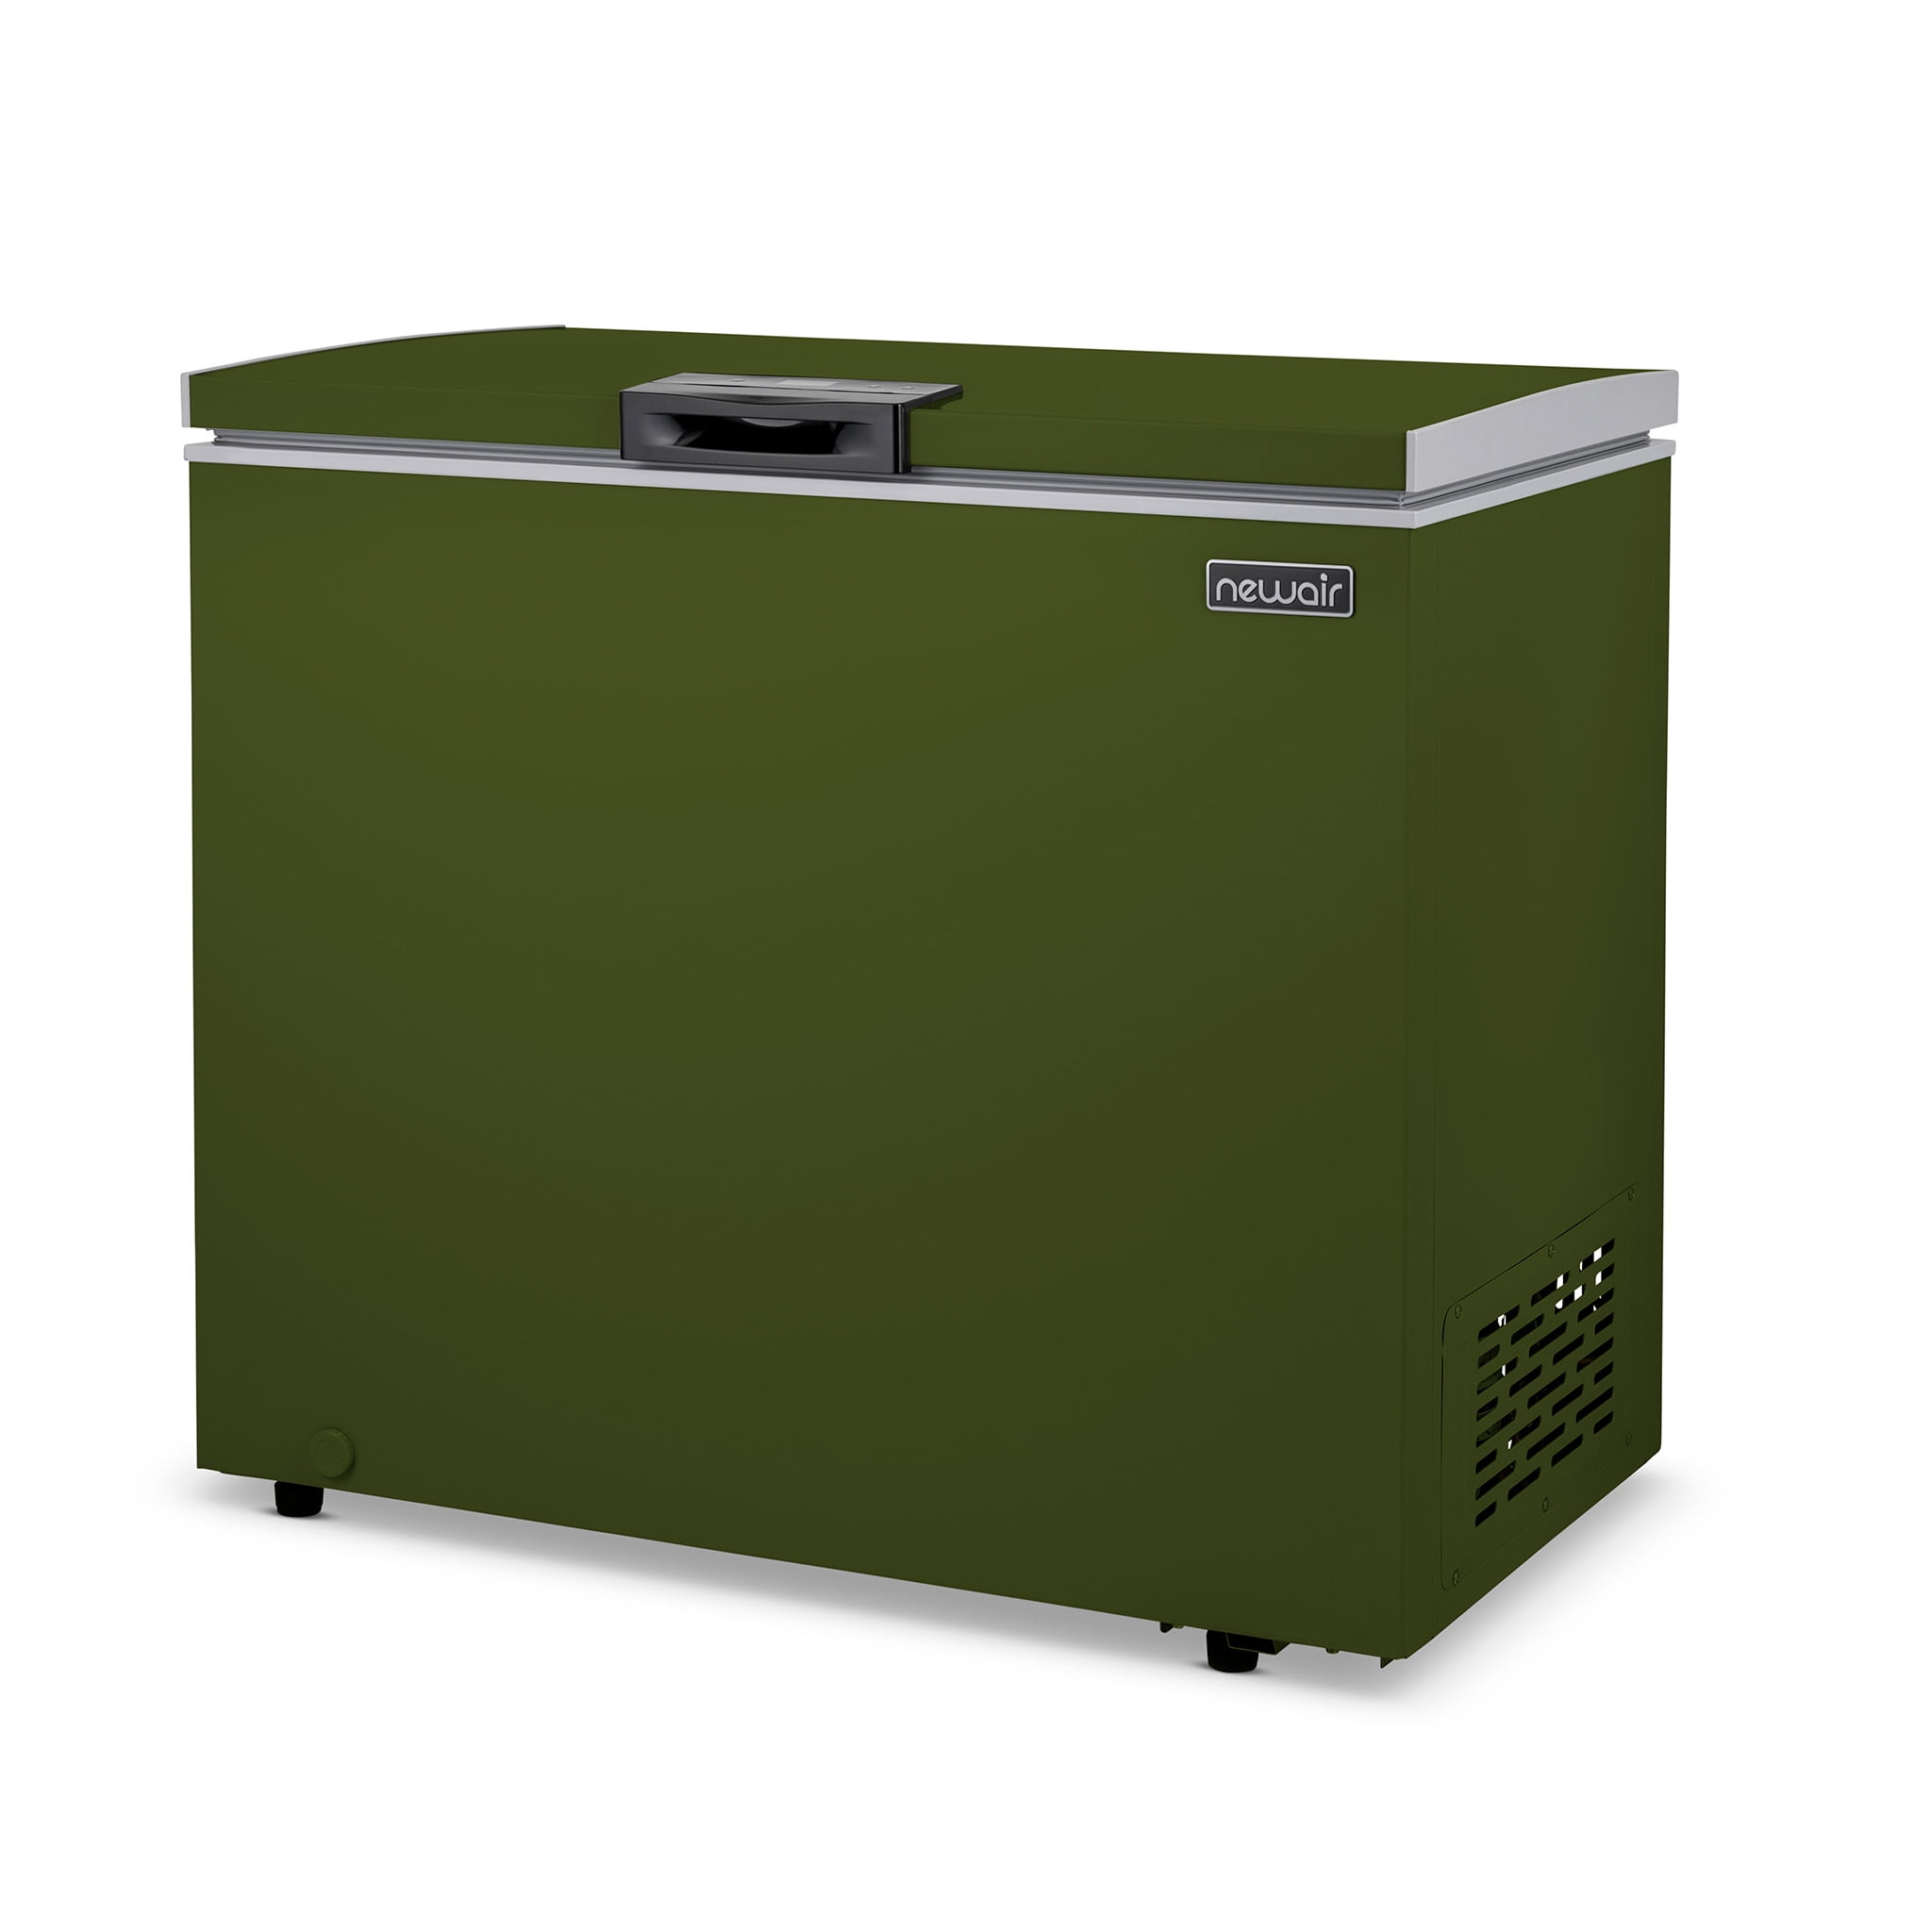 Newair 7 Cu. Ft. Mini Deep Chest Freezer and Refrigerator in Military Green  with Digital Temperature Control, Fast Freeze Mode, Stay-Open Lid,  Removeable Storage Basket, Self-Diagnostic Program 